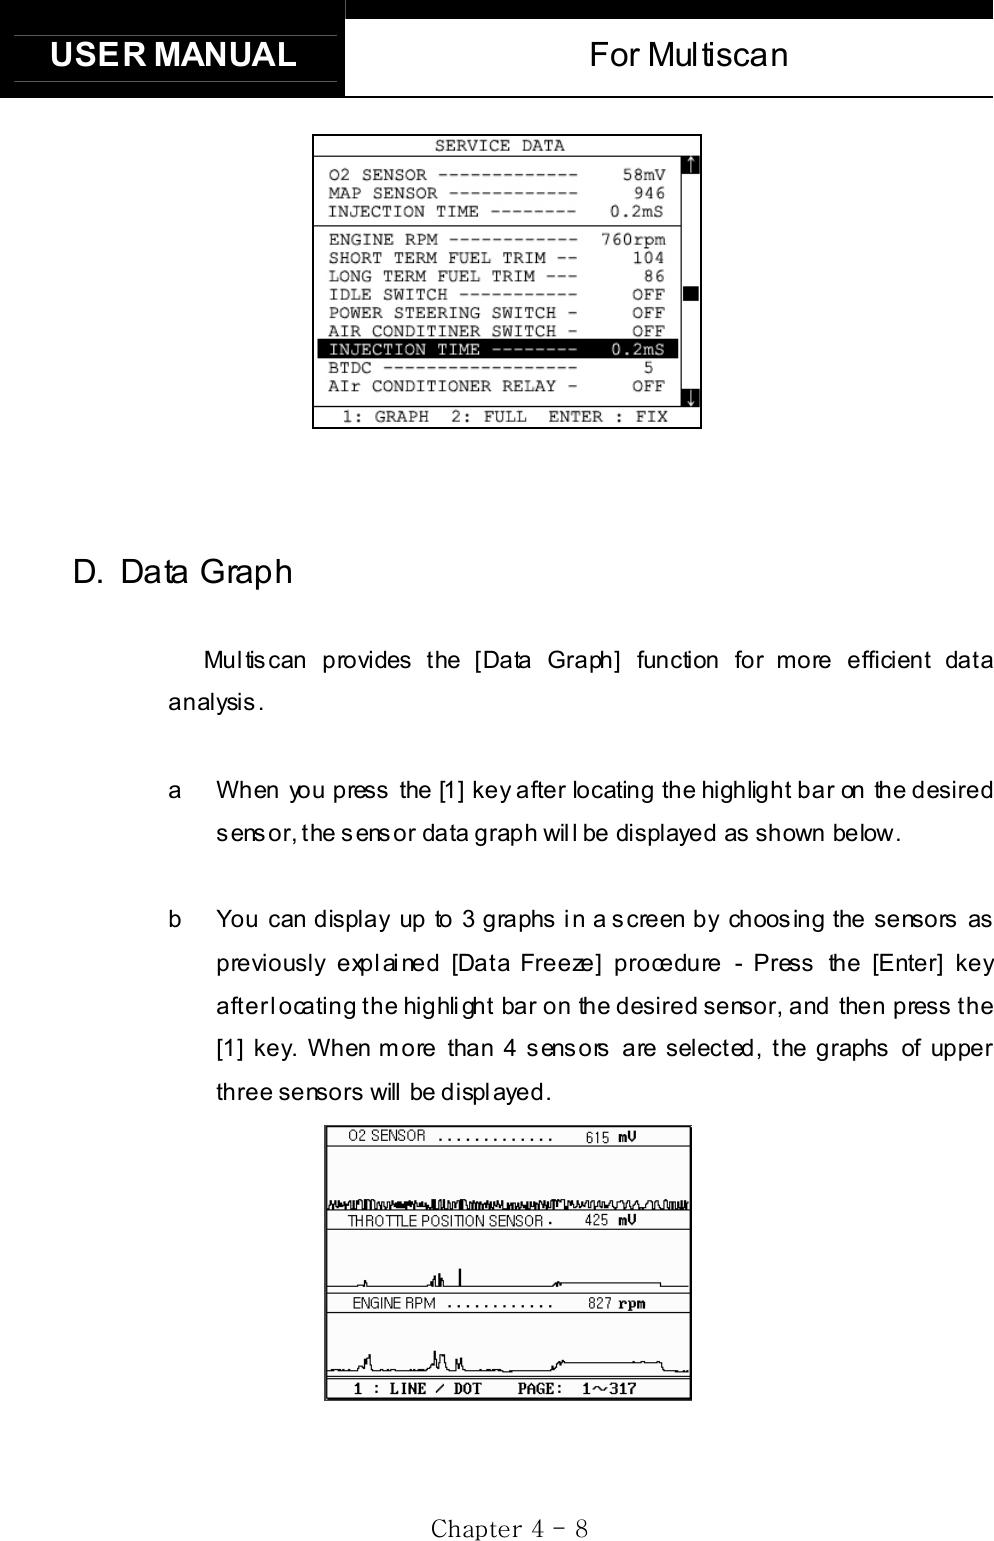 USER MANUAL  For Multiscan GjG[GTG _GD. Data Graph Multiscan provides the [Data Graph] function for more efficient data an alysis . a  When you press the [1] key after locating the highlight bar on the desired sensor, the sensor data graph will be displayed as shown below. b  You can display up to 3 graphs in a screen by choosing the sensors as previously explained [Data Freeze] procedure - Press the [Enter] key after locating the highlight bar  on the desired sensor, and  then press the [1] key. When more than 4 sensors are selected, the graphs of upper three sensors  will be displayed. 